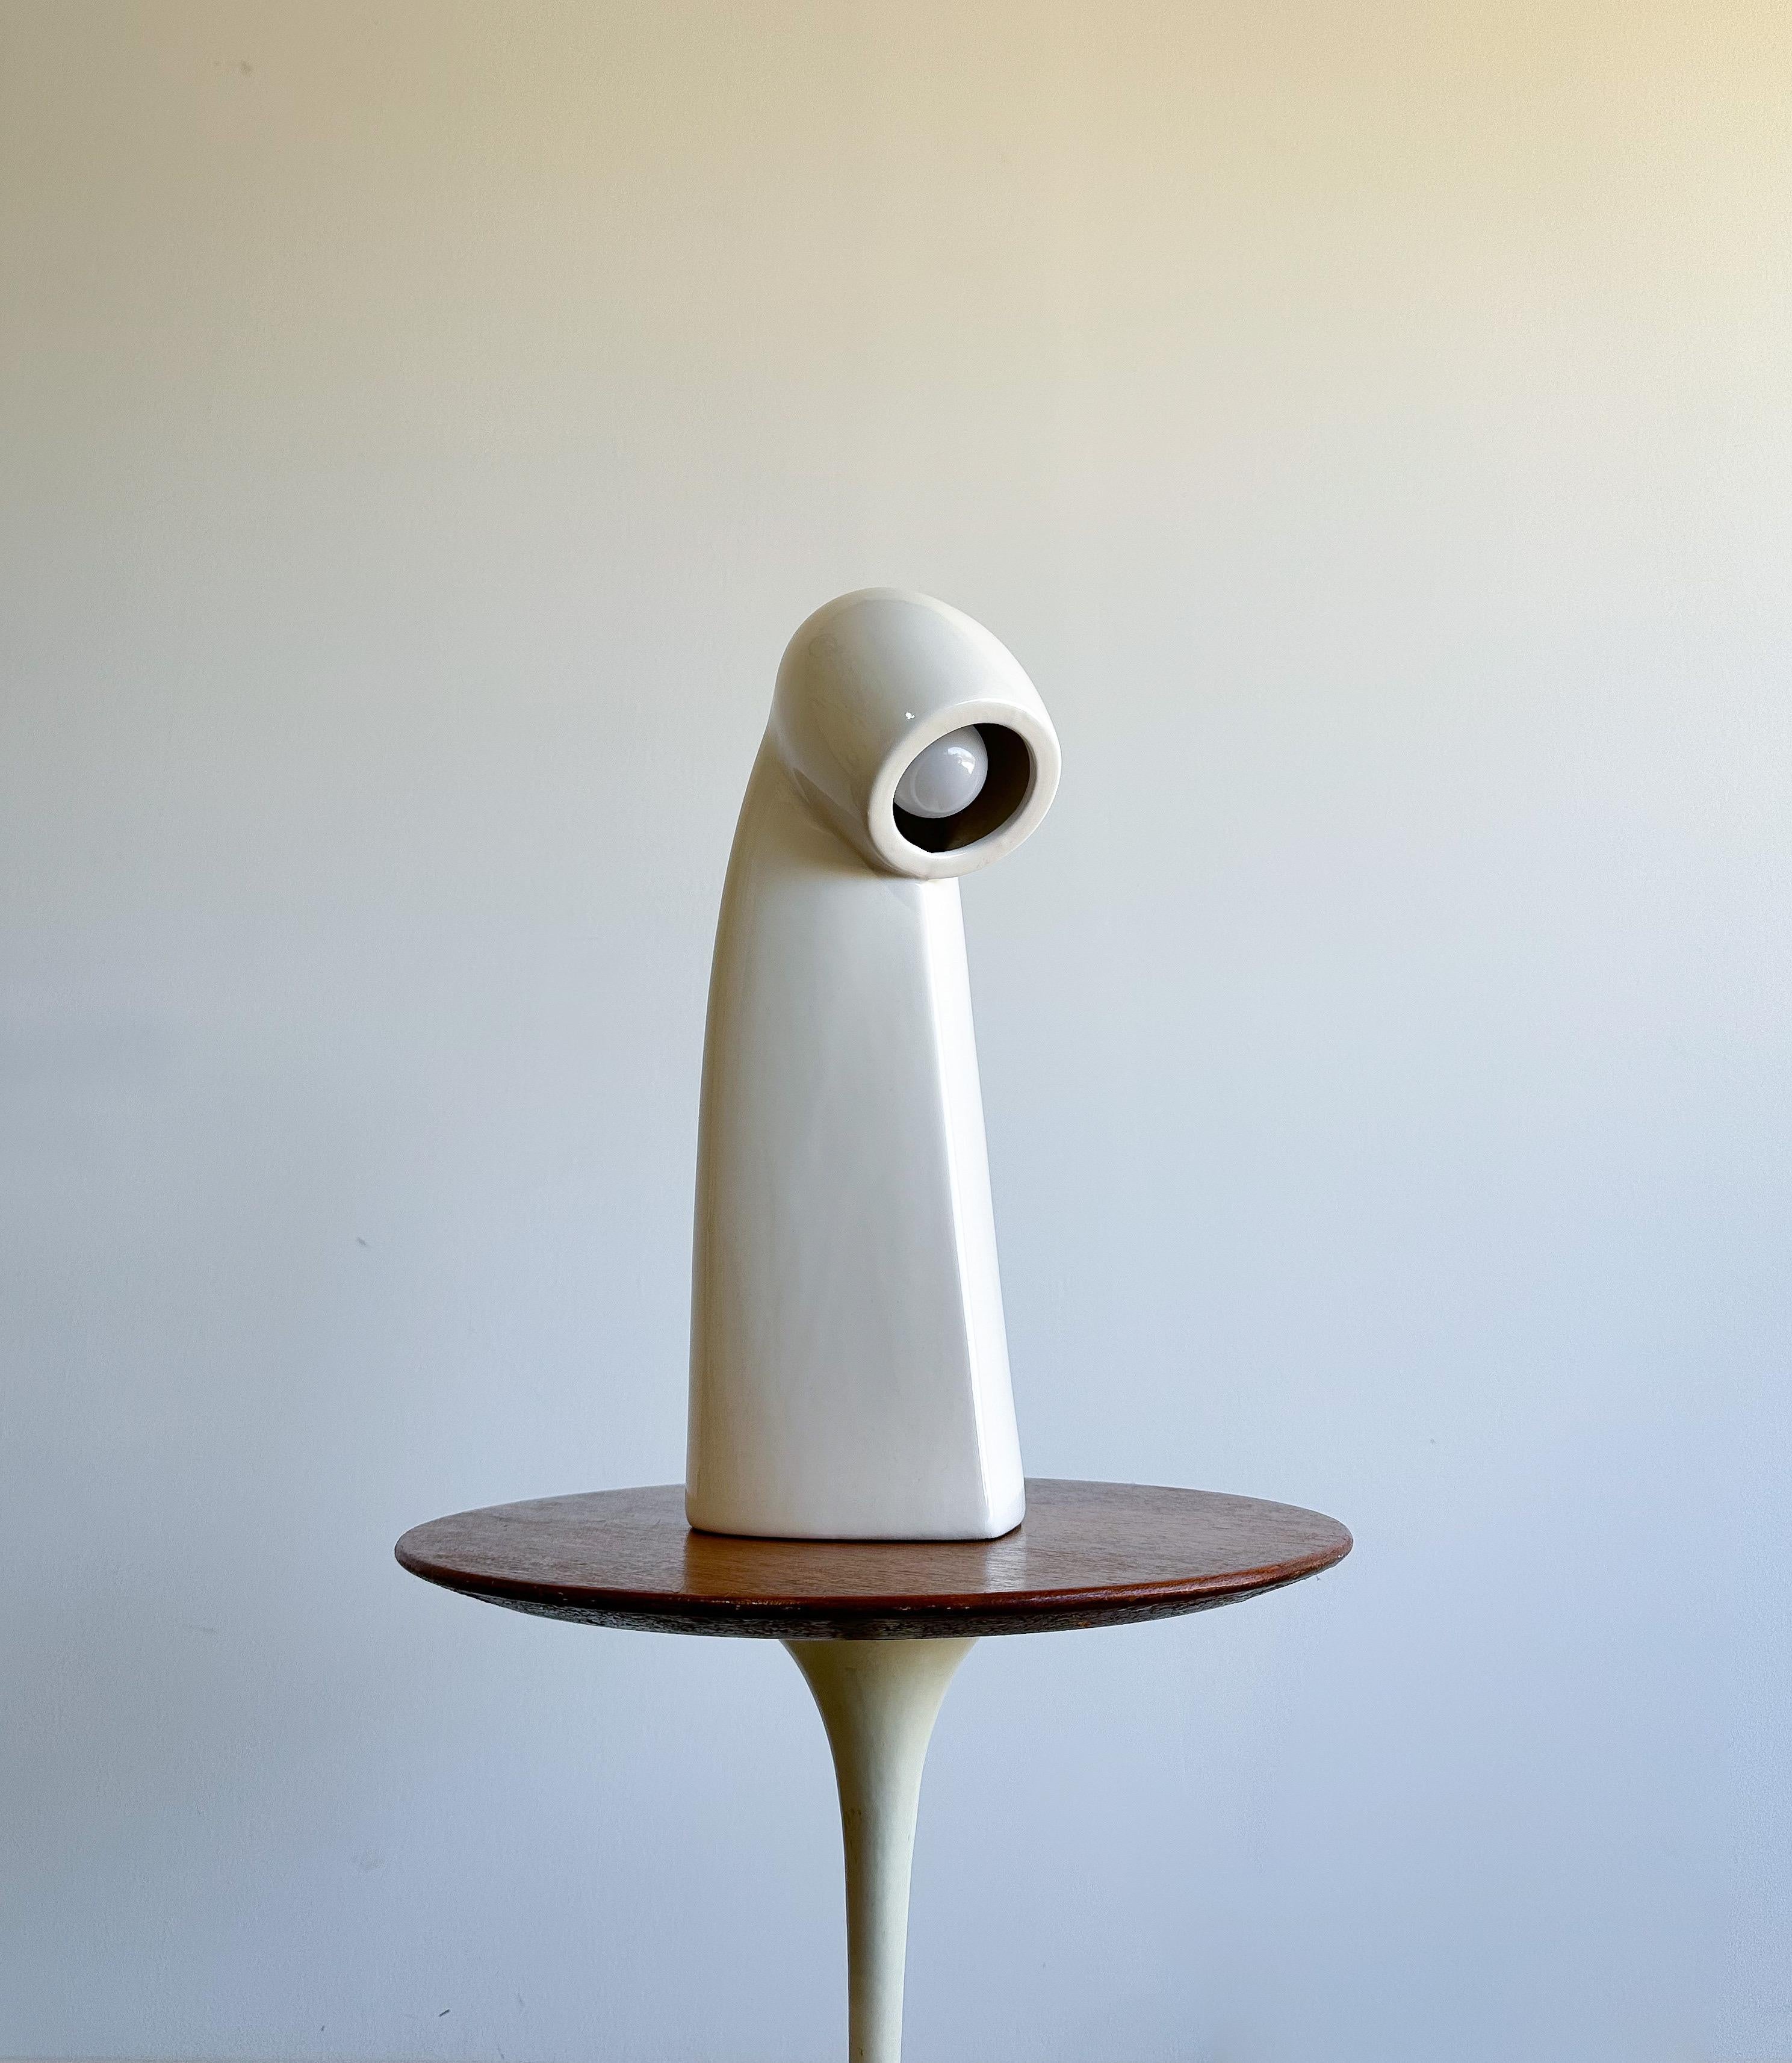 Offered is a fun and unique ceramic table lamp resembling a periscope with its overall design and downward facing illumination.

The designer/maker is unknown, but the design and production were done at a high level.

This would be a great addition